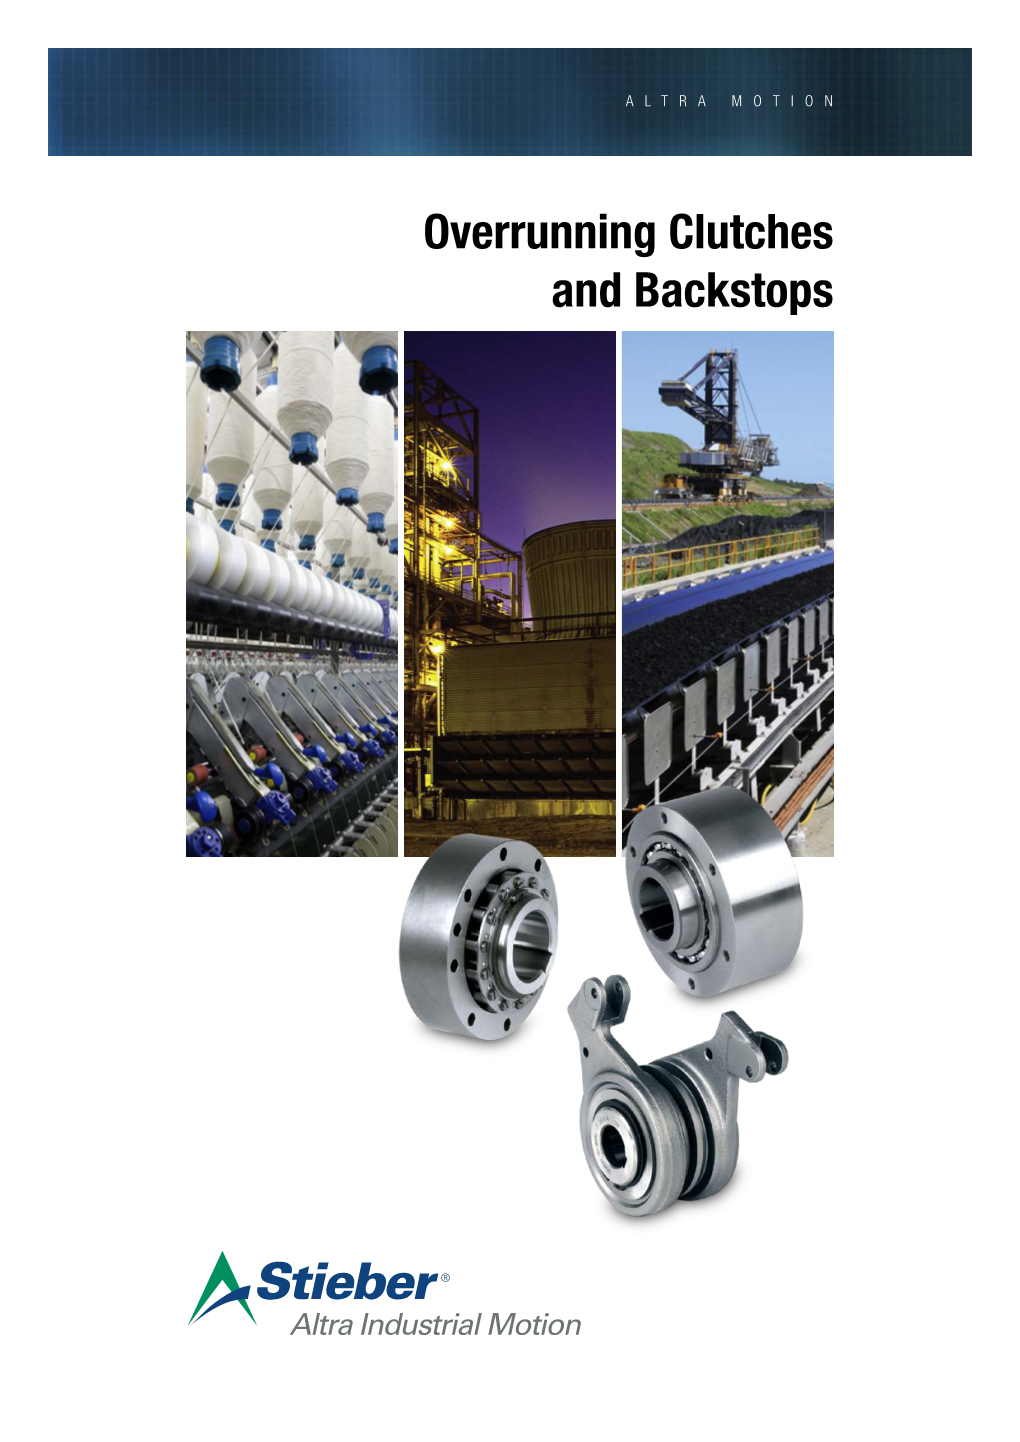 Overrunning Clutches and Backstops